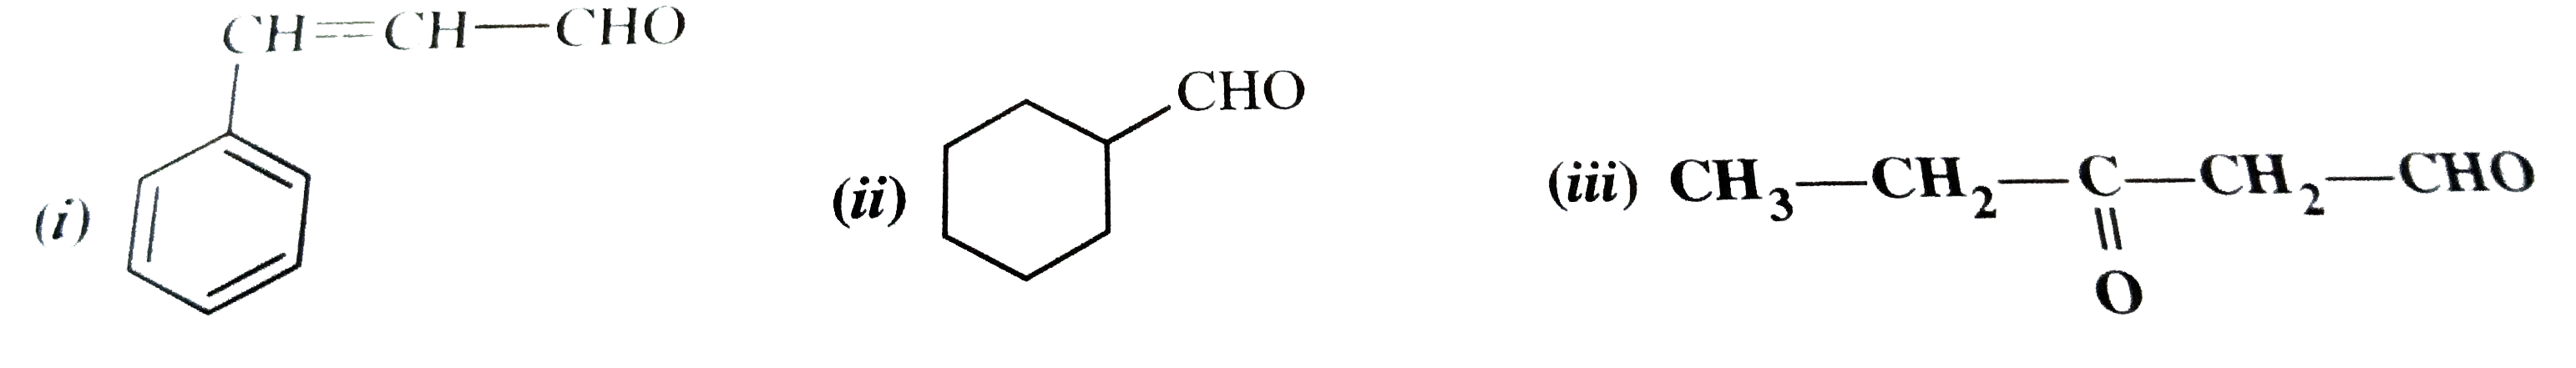 Give the IUPAC names of the following compounds       (iv). CH(3)-CH=CH-CHO